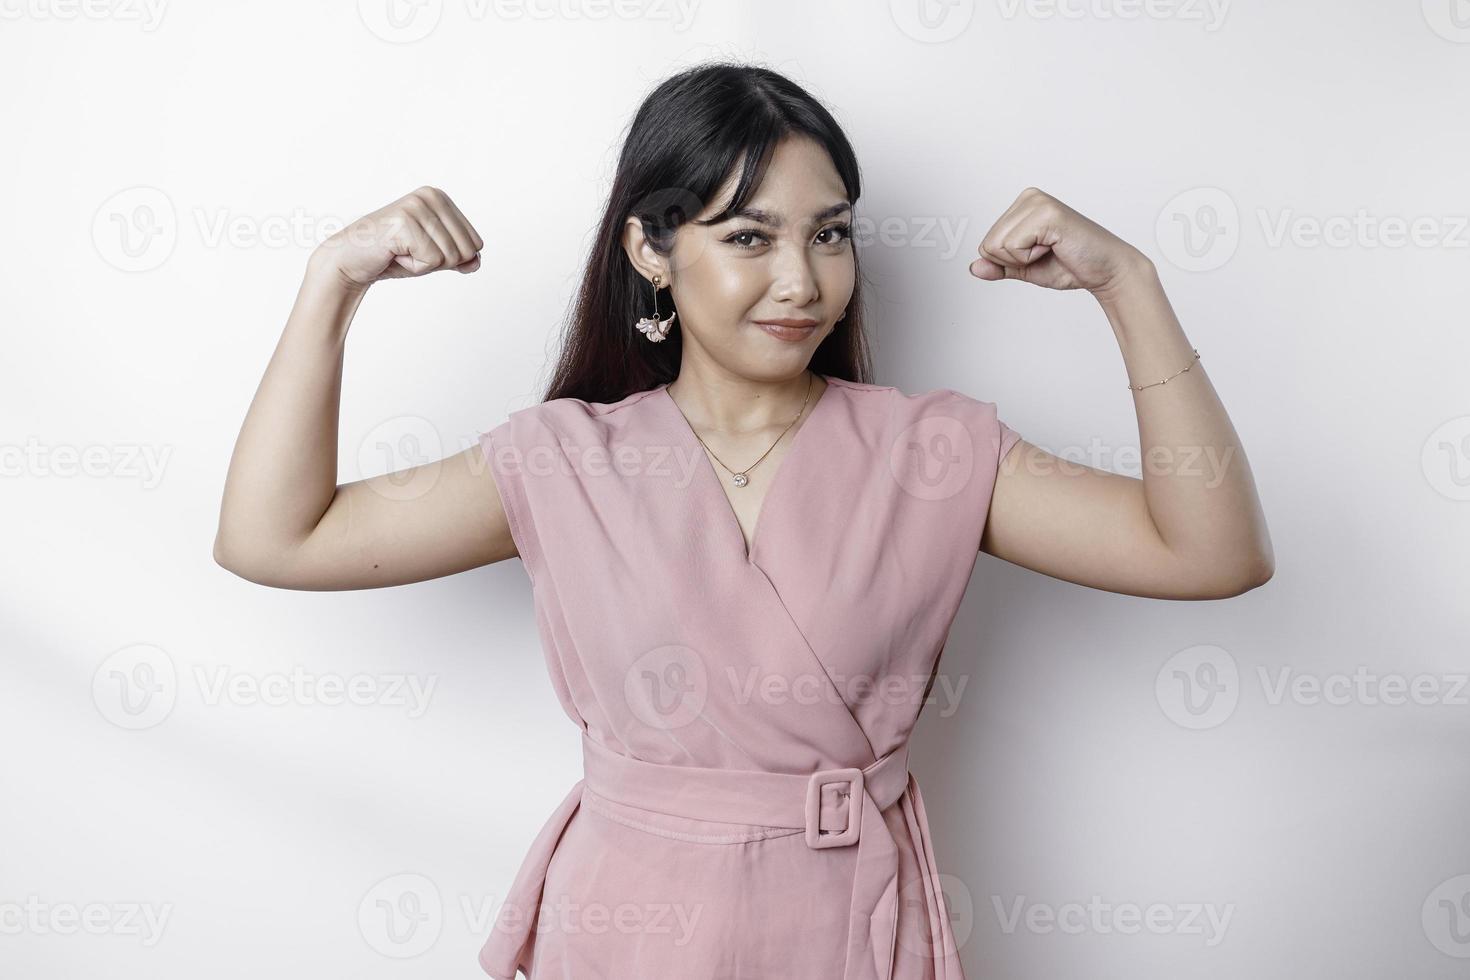 Excited Asian woman wearing a pink blouse showing strong gesture by lifting her arms and muscles smiling proudly photo